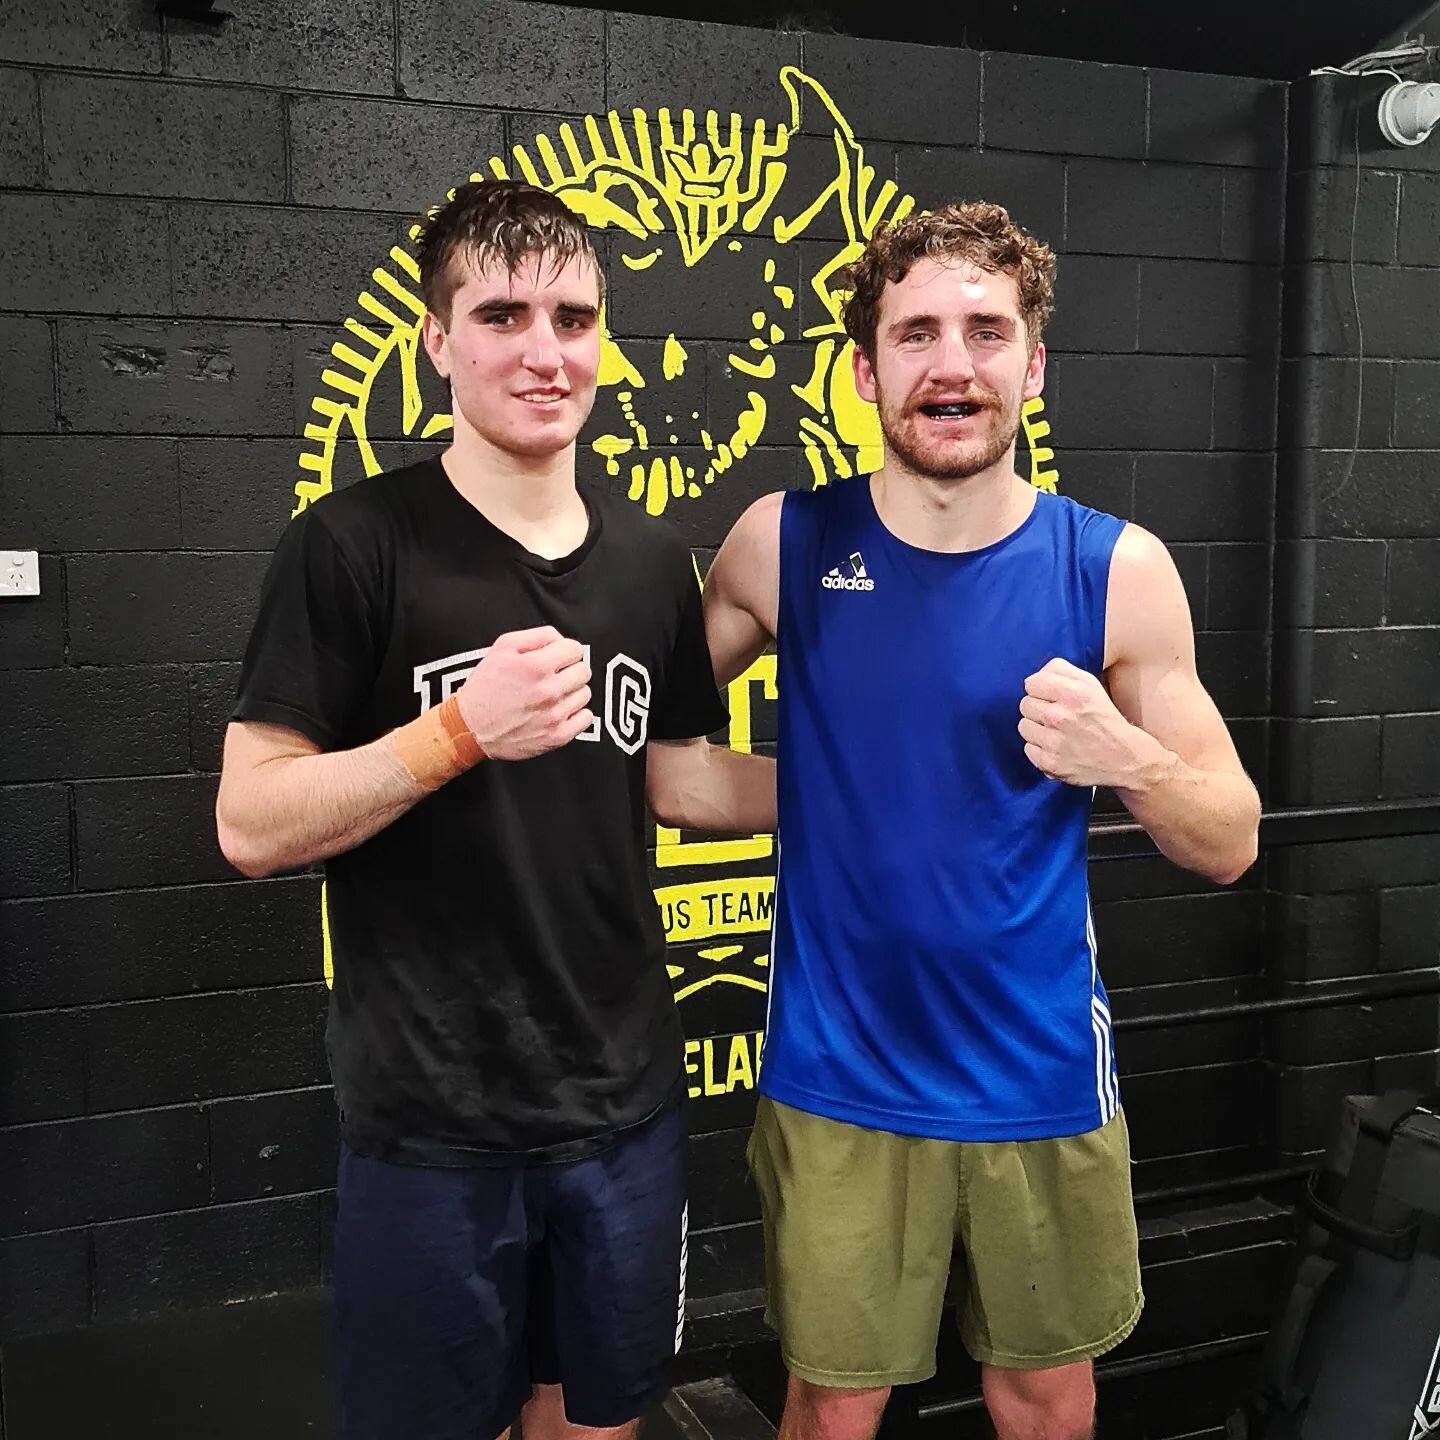 Great rounds this morning between these two, thank you @bradon_kirk and @coach.phil.goodes for making the trip down 👊